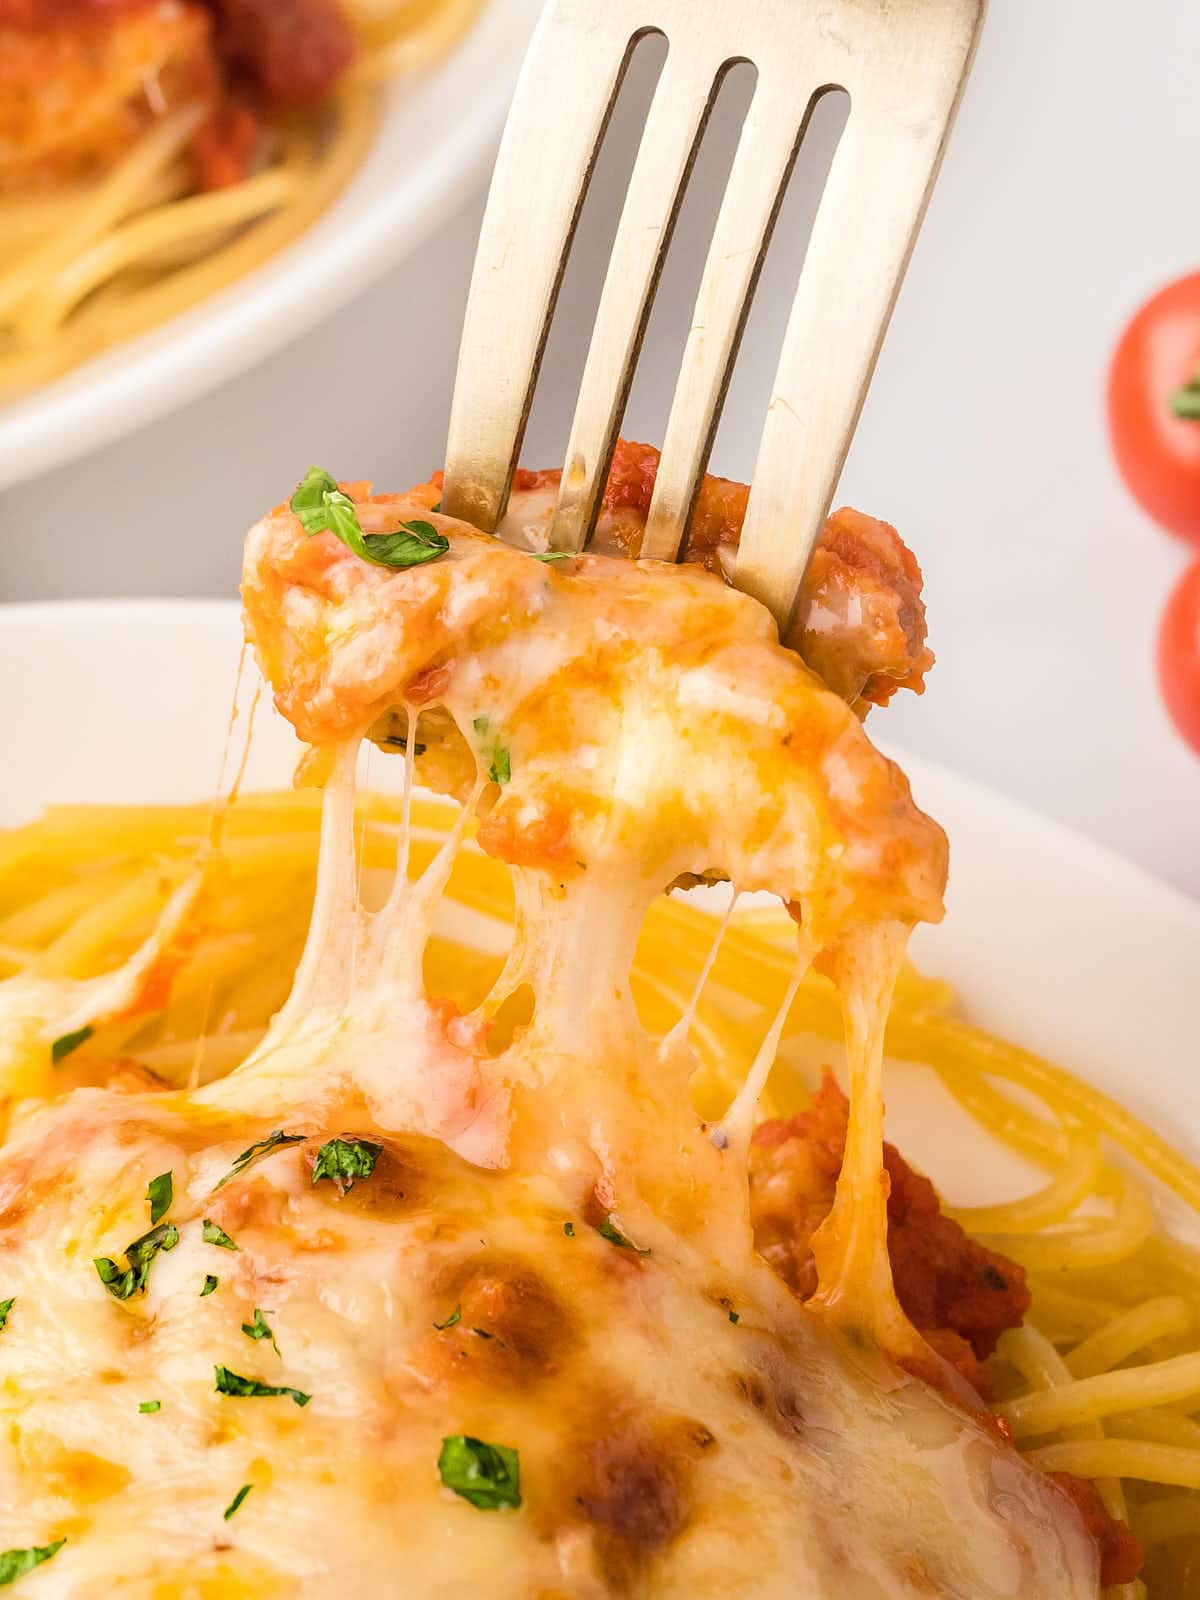 A fork is being used to eat a plate of spaghetti topped with Chicken Parmesan.